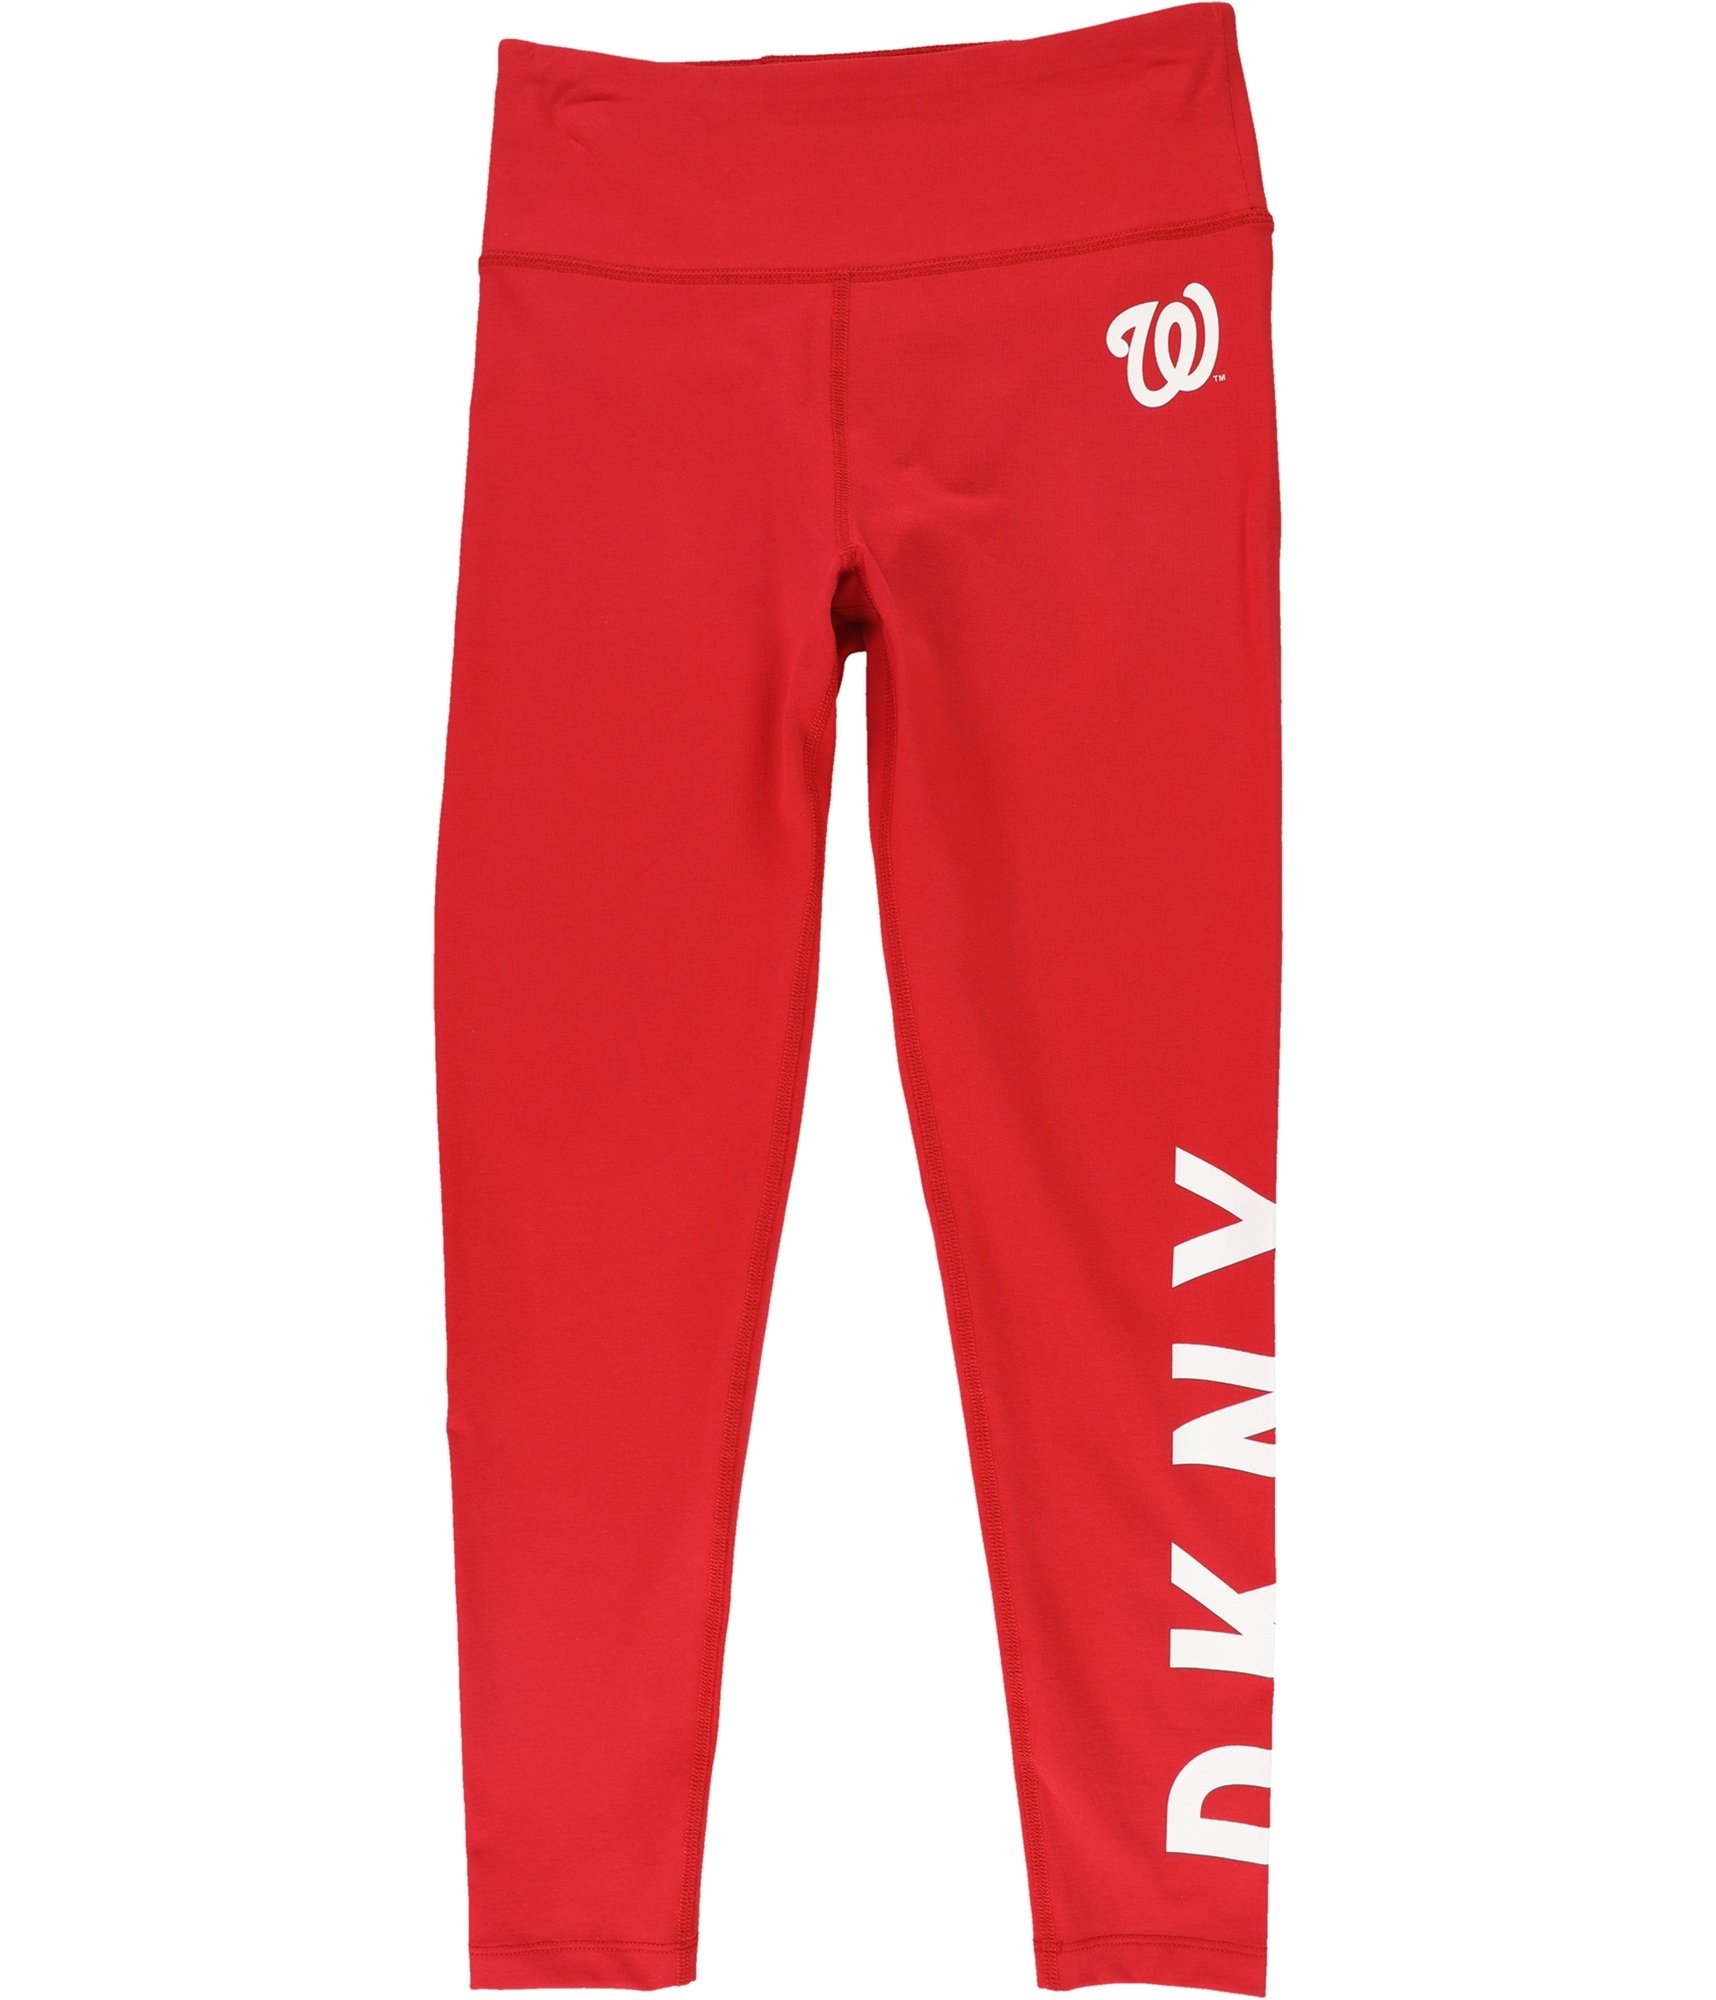 Buy a Dkny Womens Washington Nationals Compression Athletic Pants, TW2